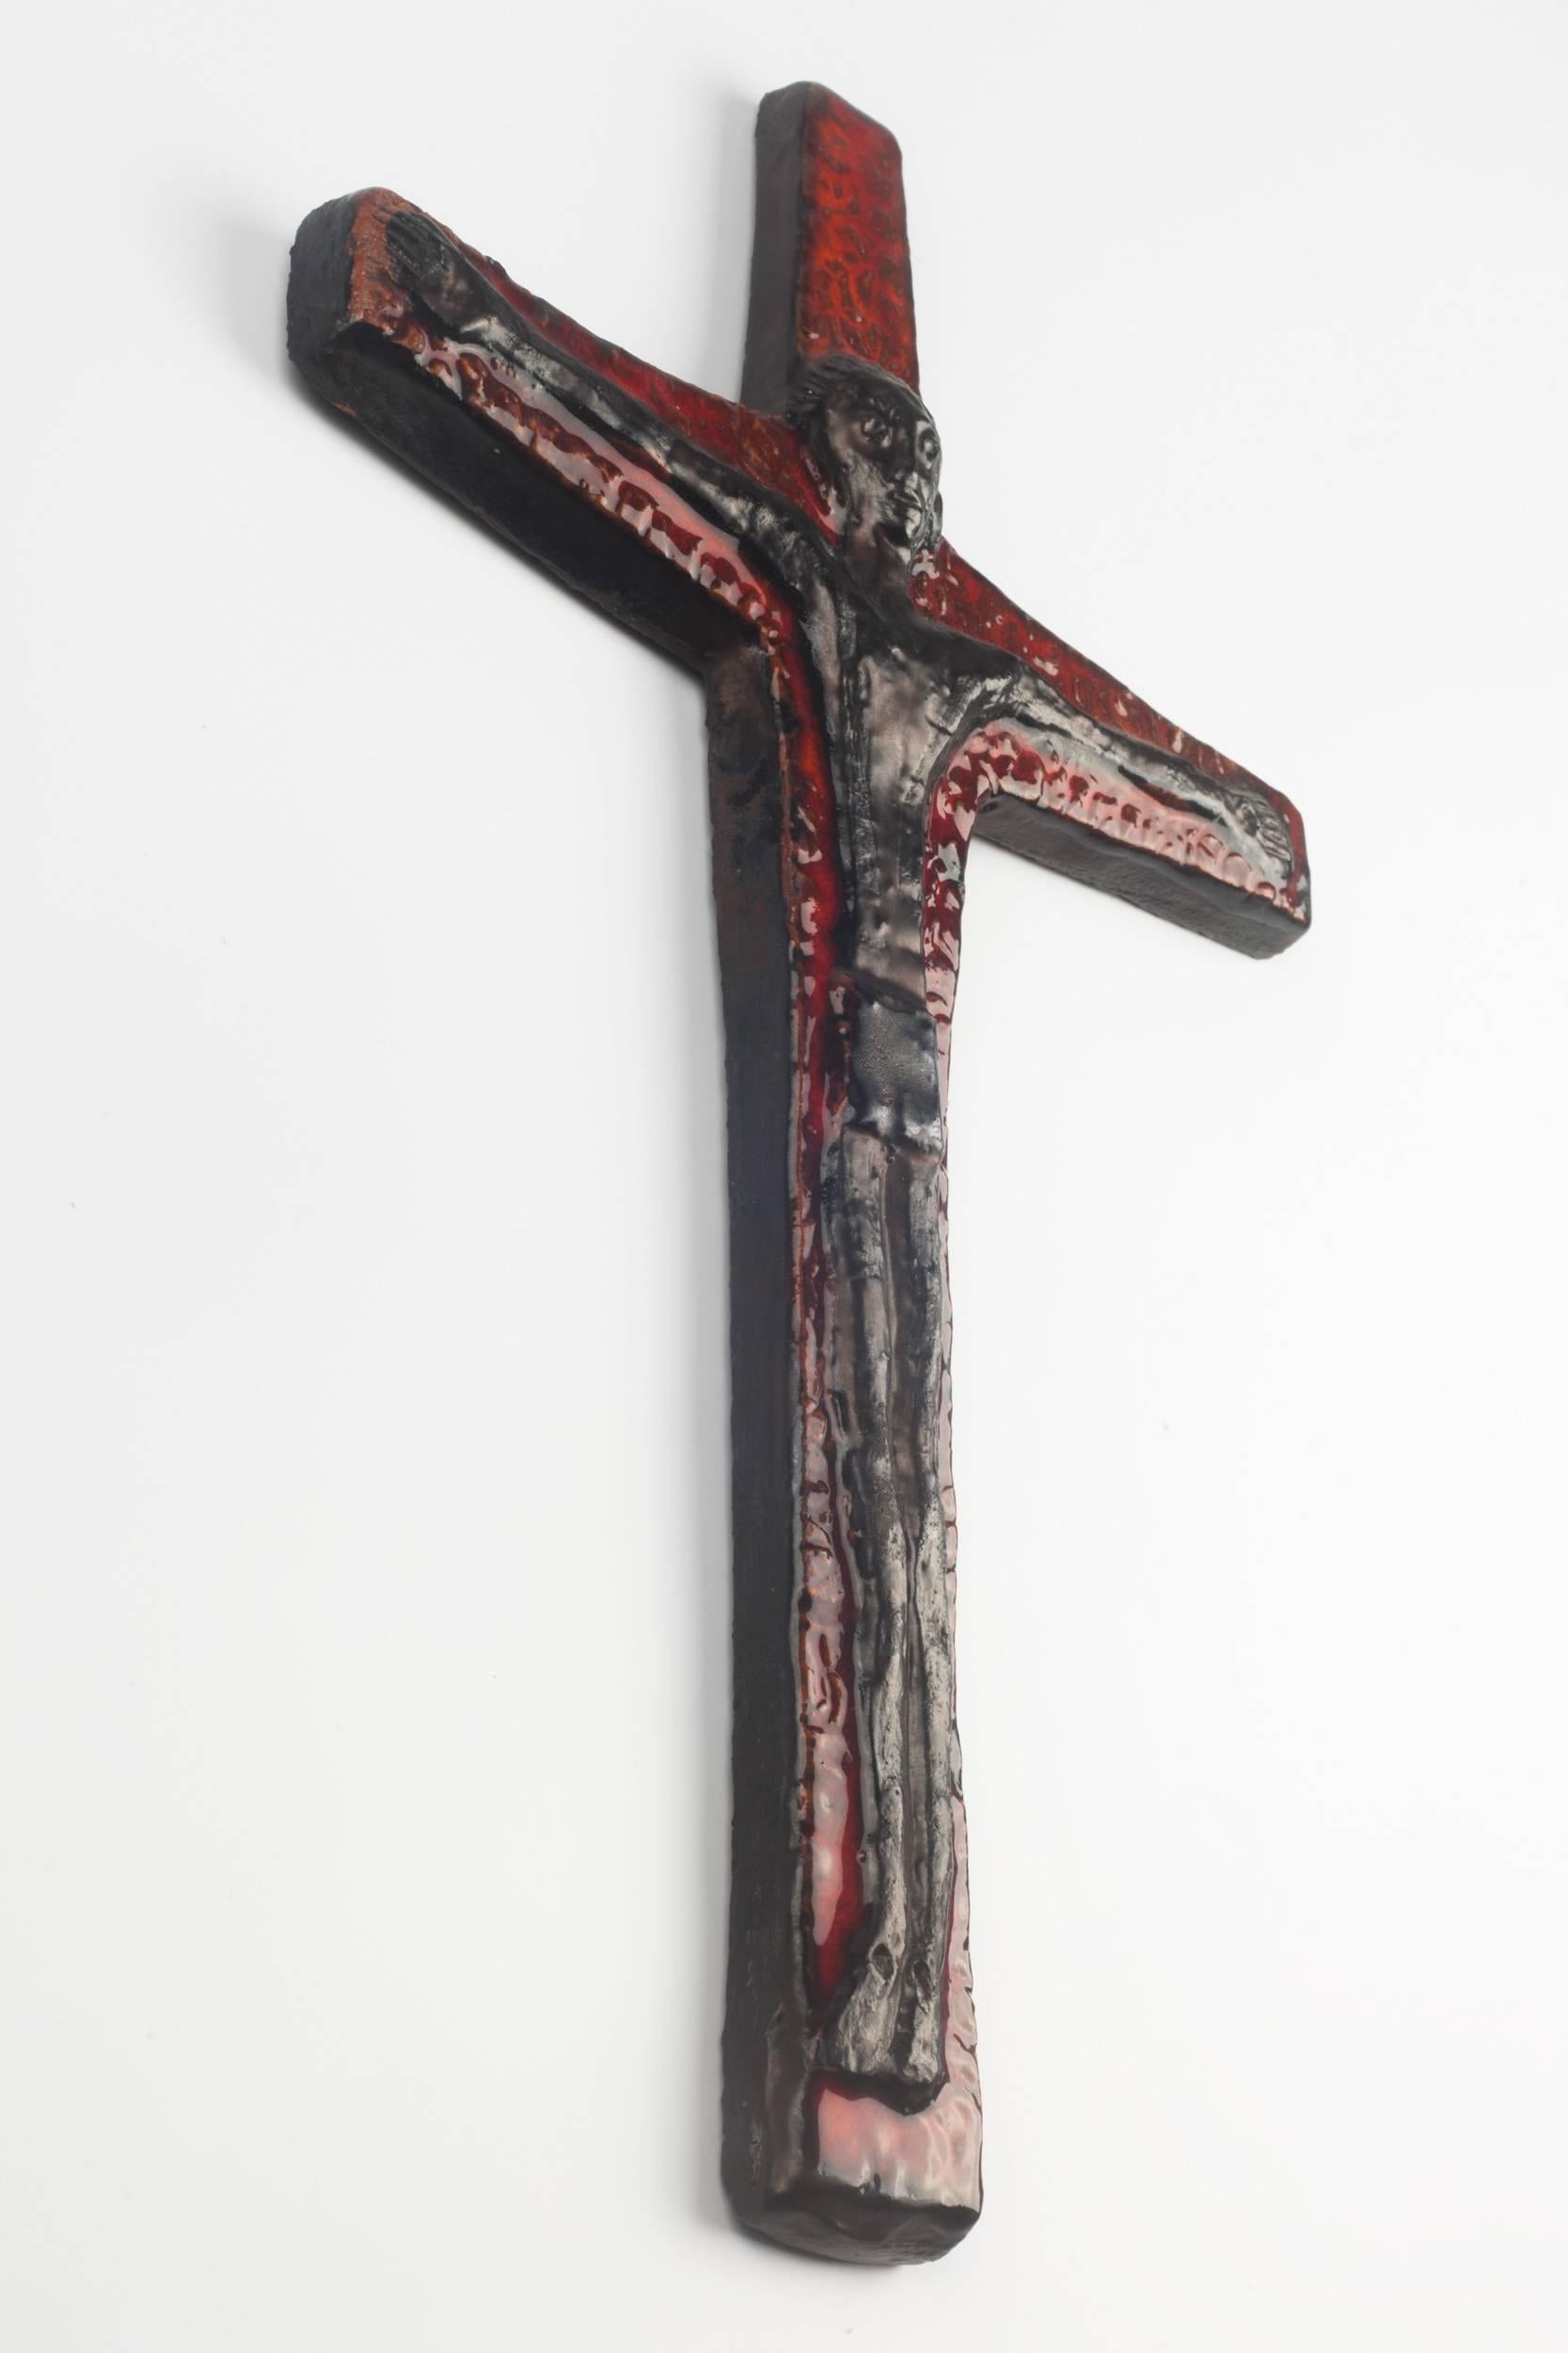 Twelve inch tall wall crucifix in ceramic, made in Belgium in the 1950s.
Black figure on dark Red Cross. Brutalist volumes.

This piece is part of a 69 piece ceramic crucifix collection, all made in Belgium between the 1950 and late 1970s. From